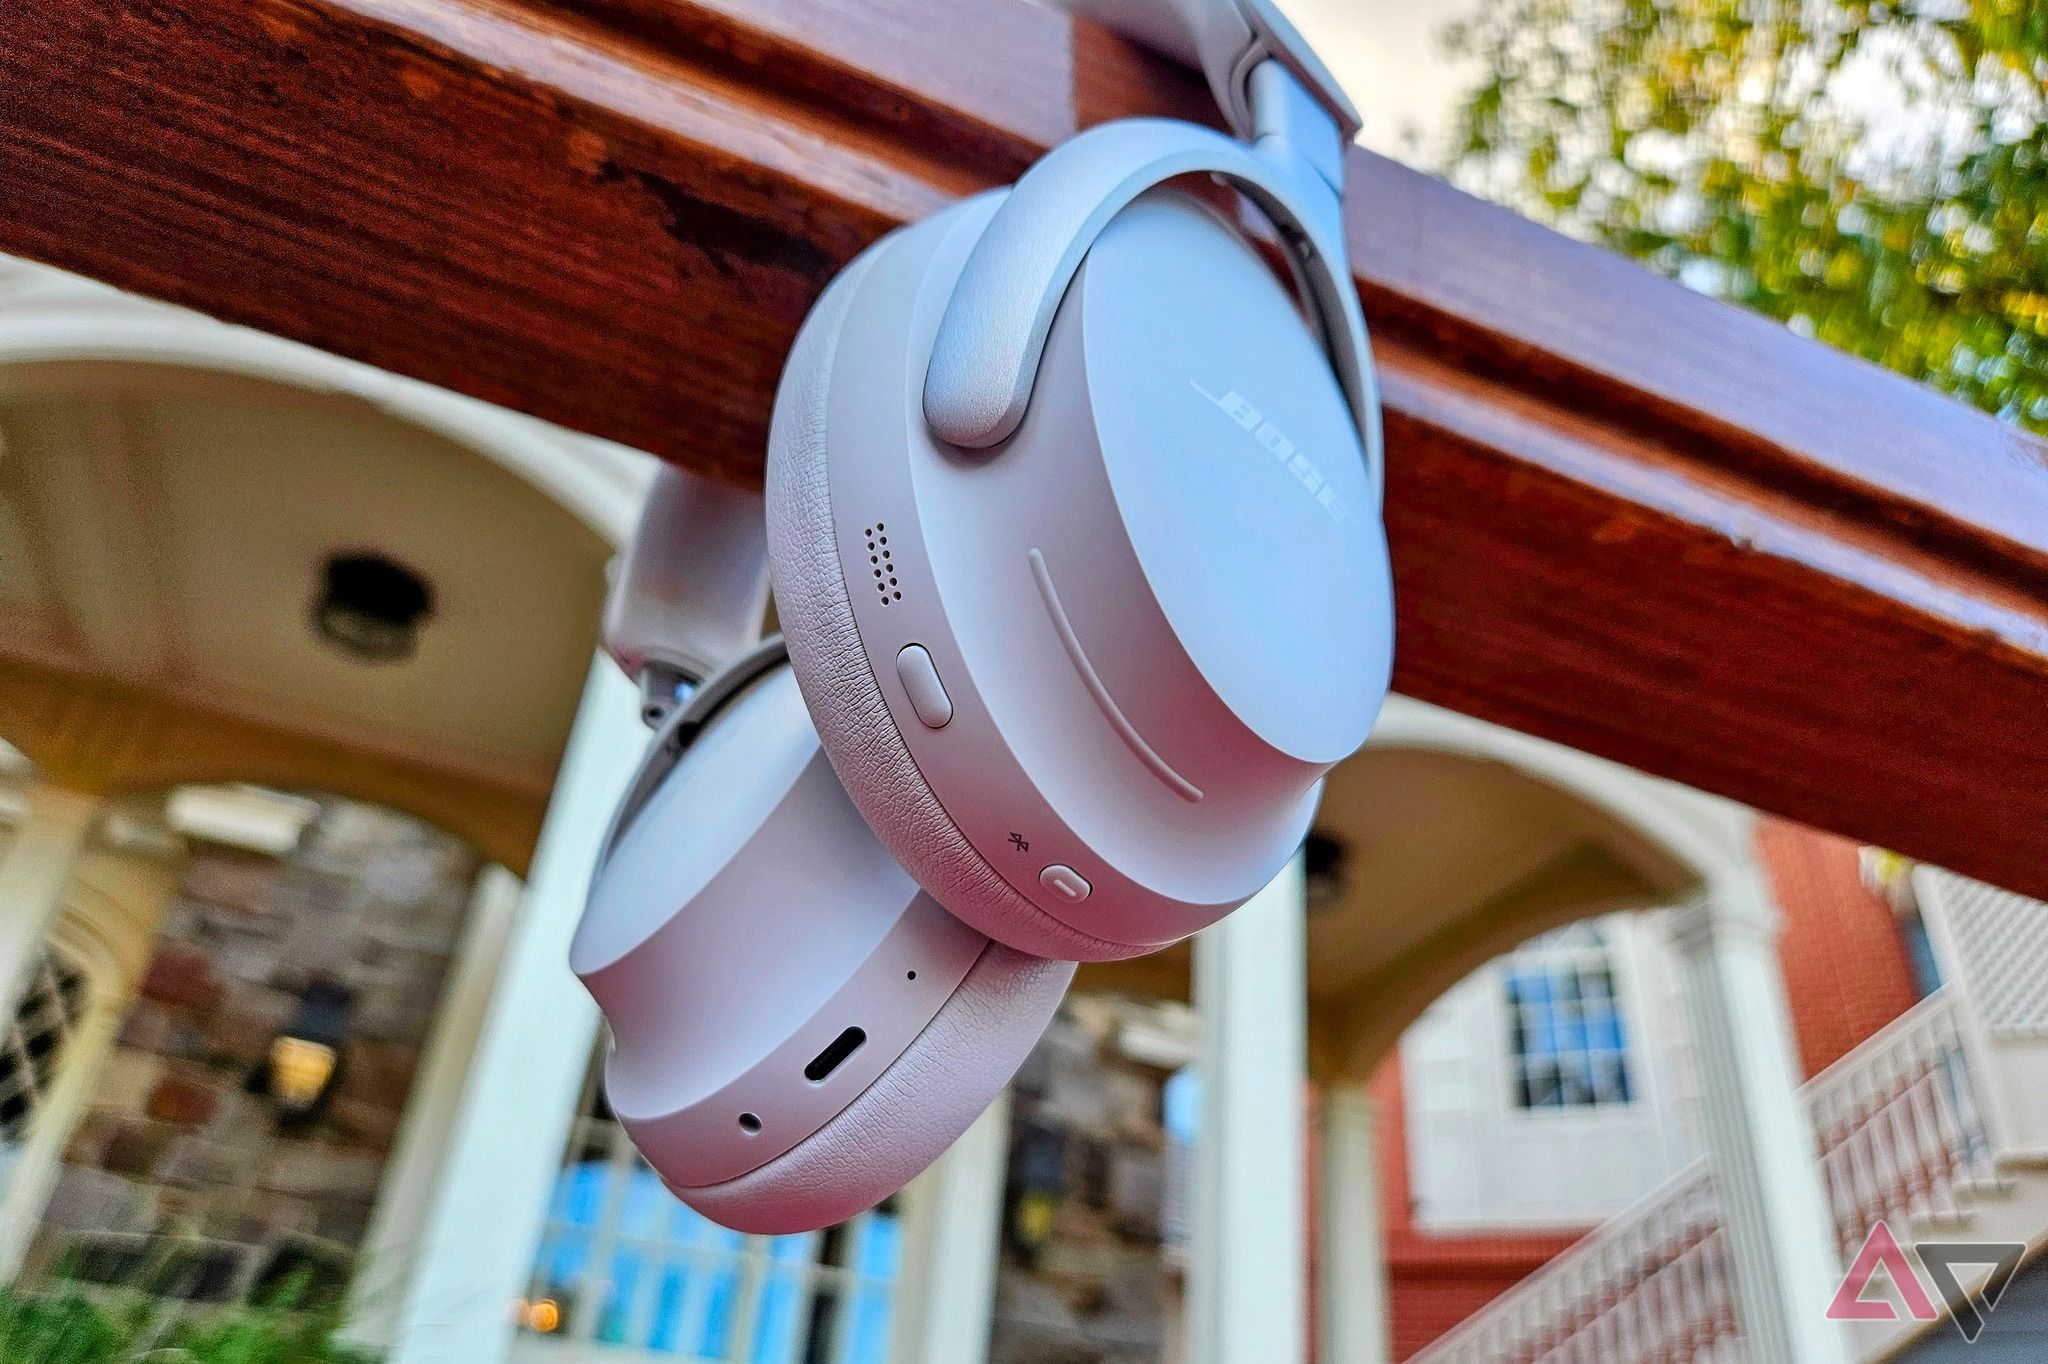 White Bose QuietComfort Ultra headphones hanging on a porch railing outside.